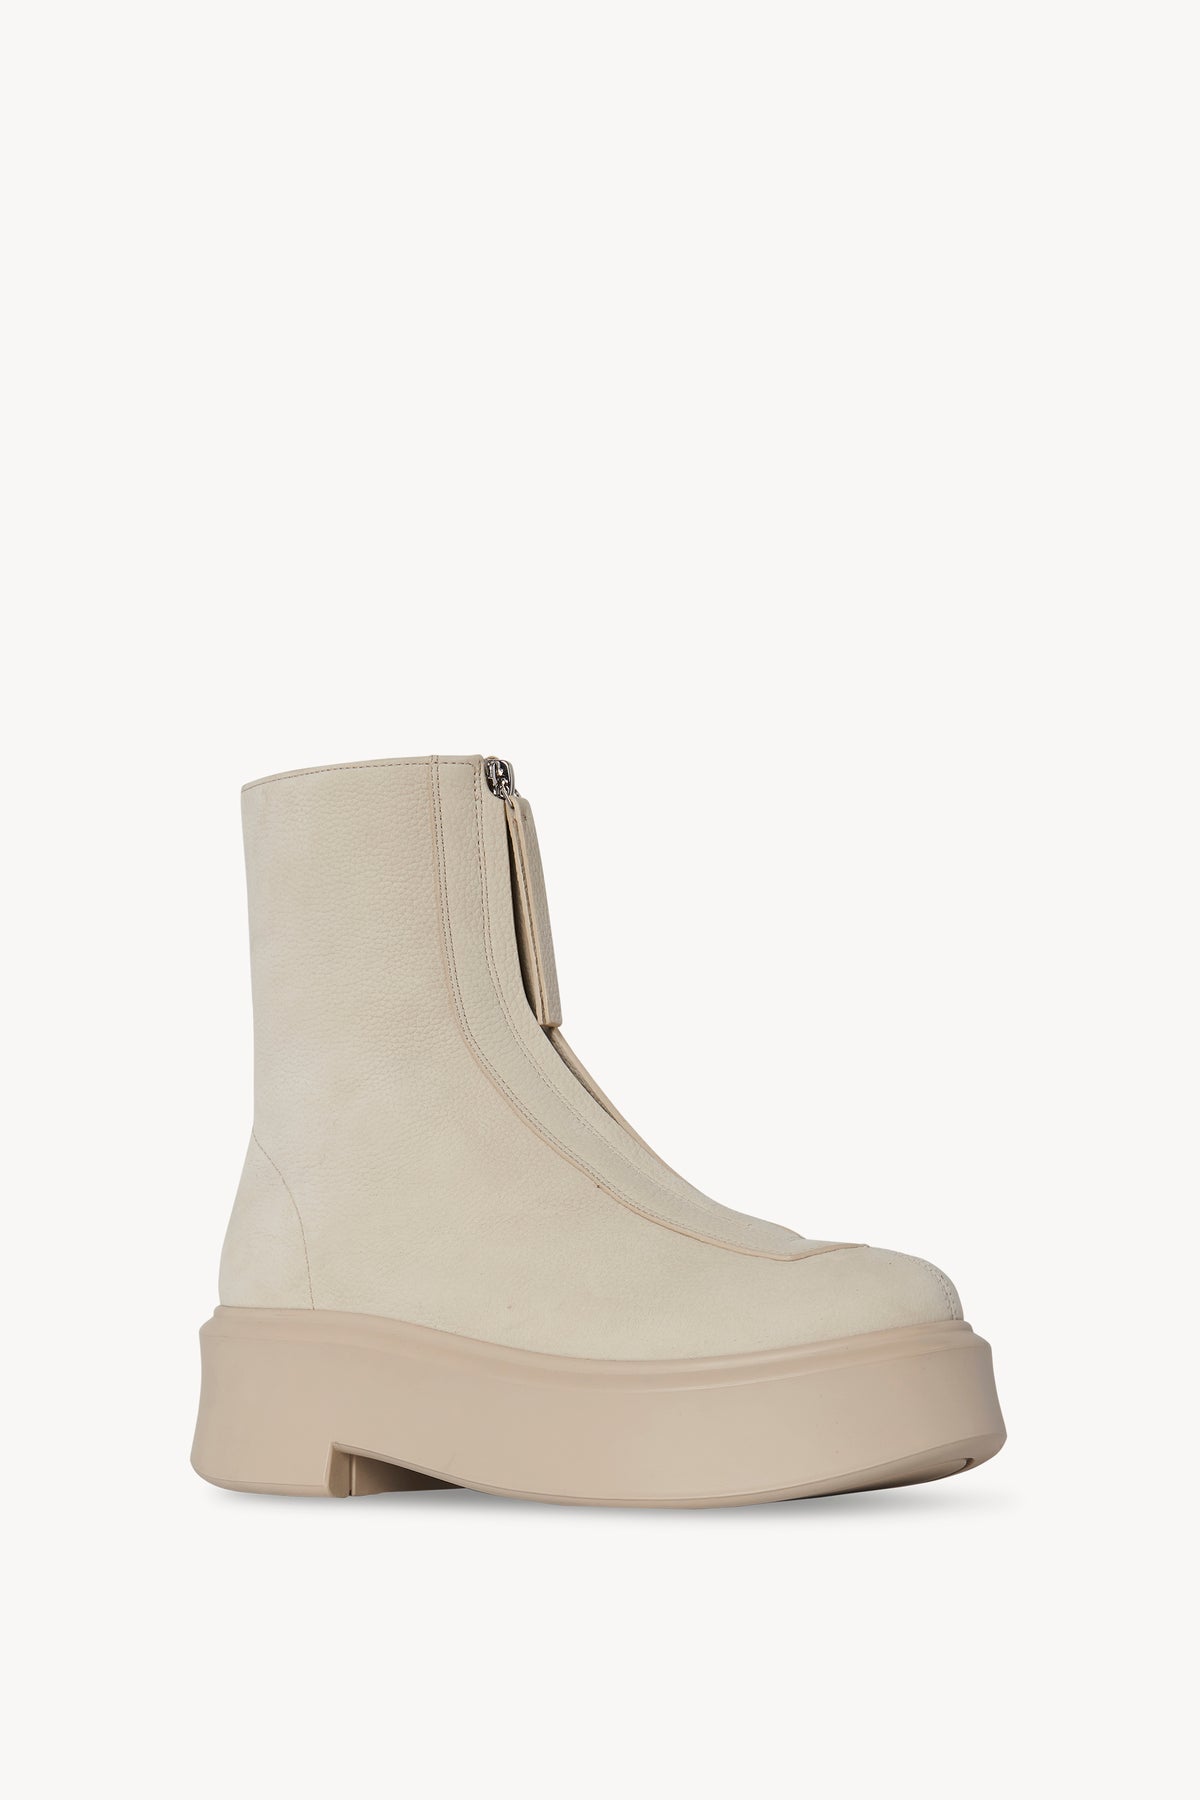 the row zipped boot